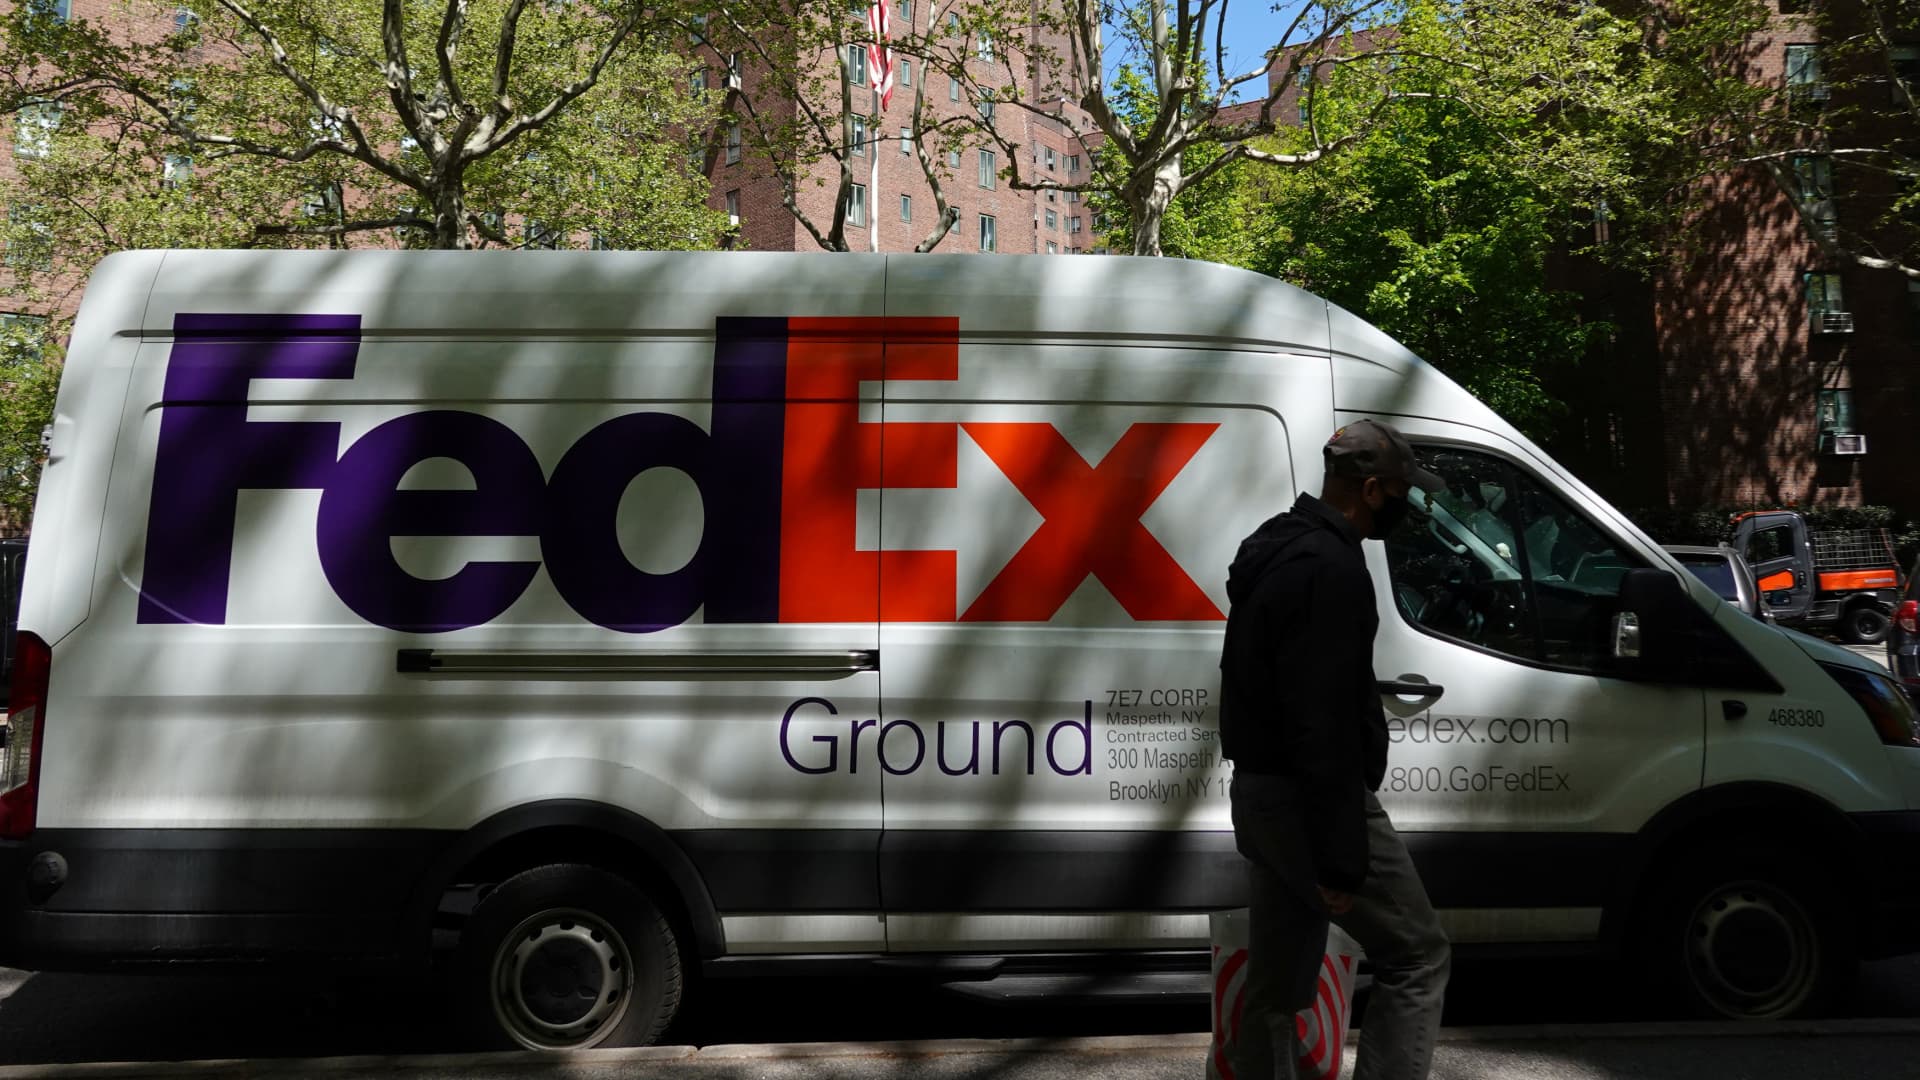 FedEx hikes package rates, details cost cutting as demand weakens globally